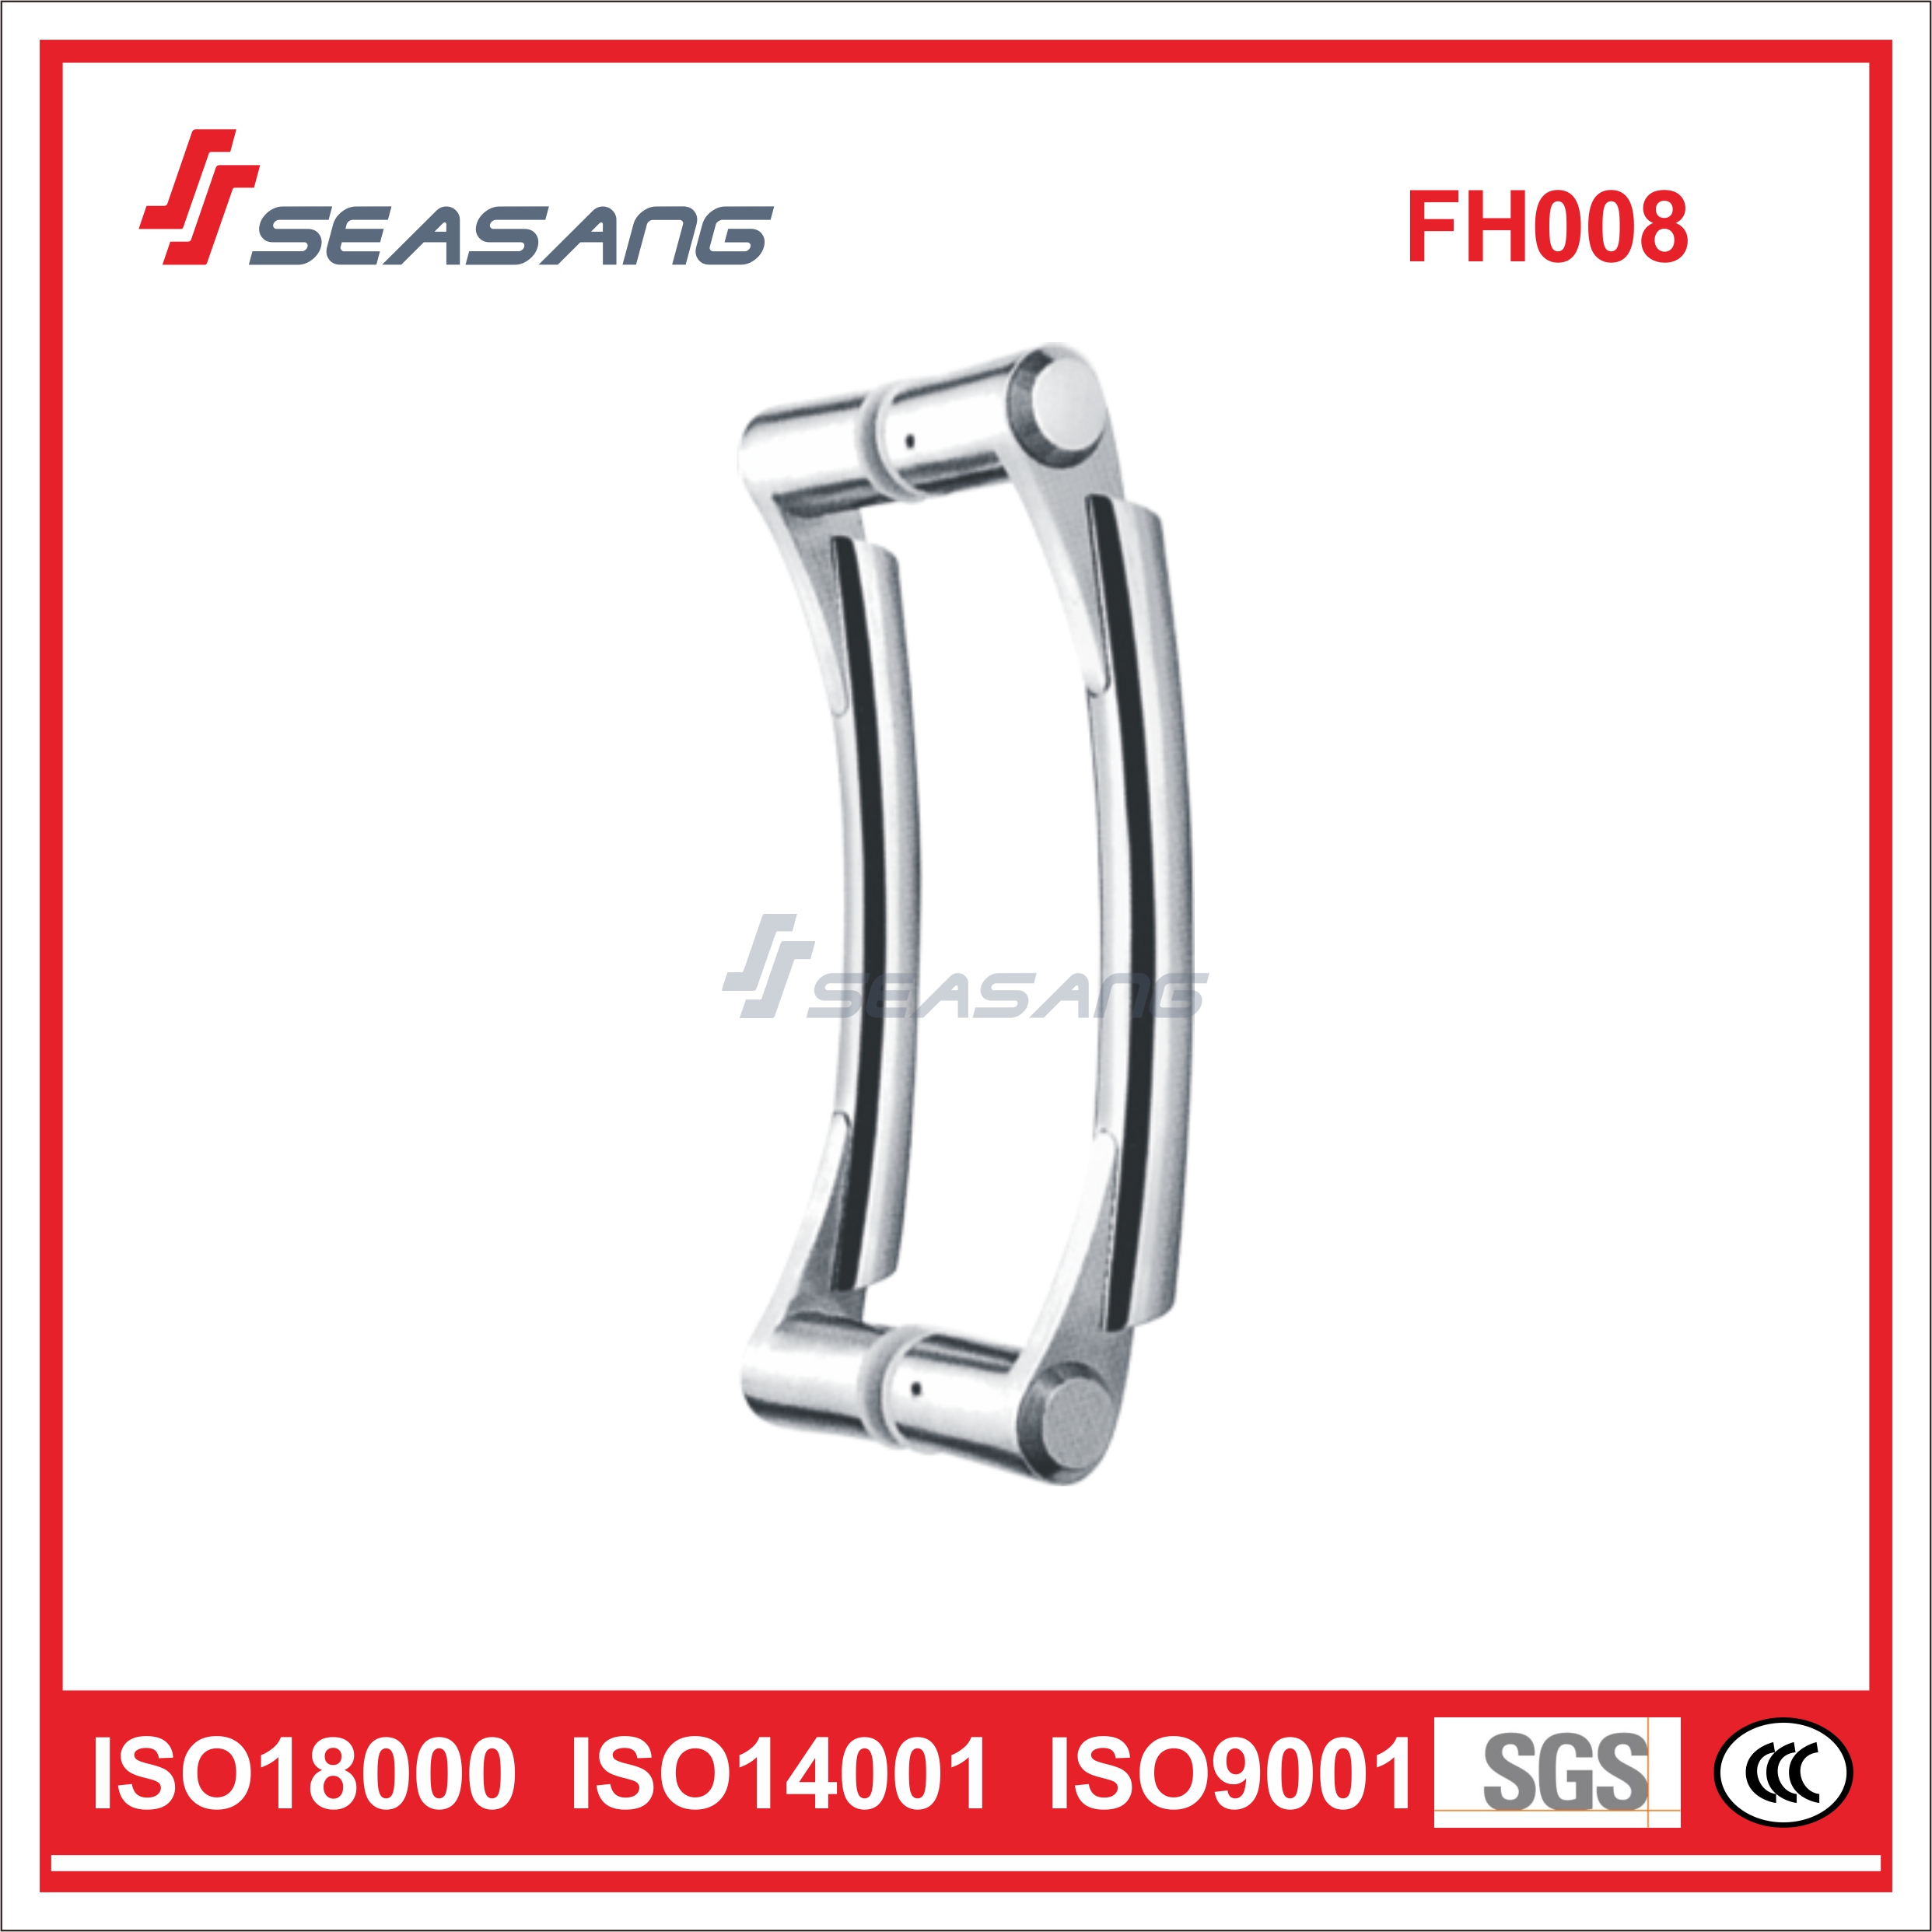 Casting Stainless Steel Pull Handle